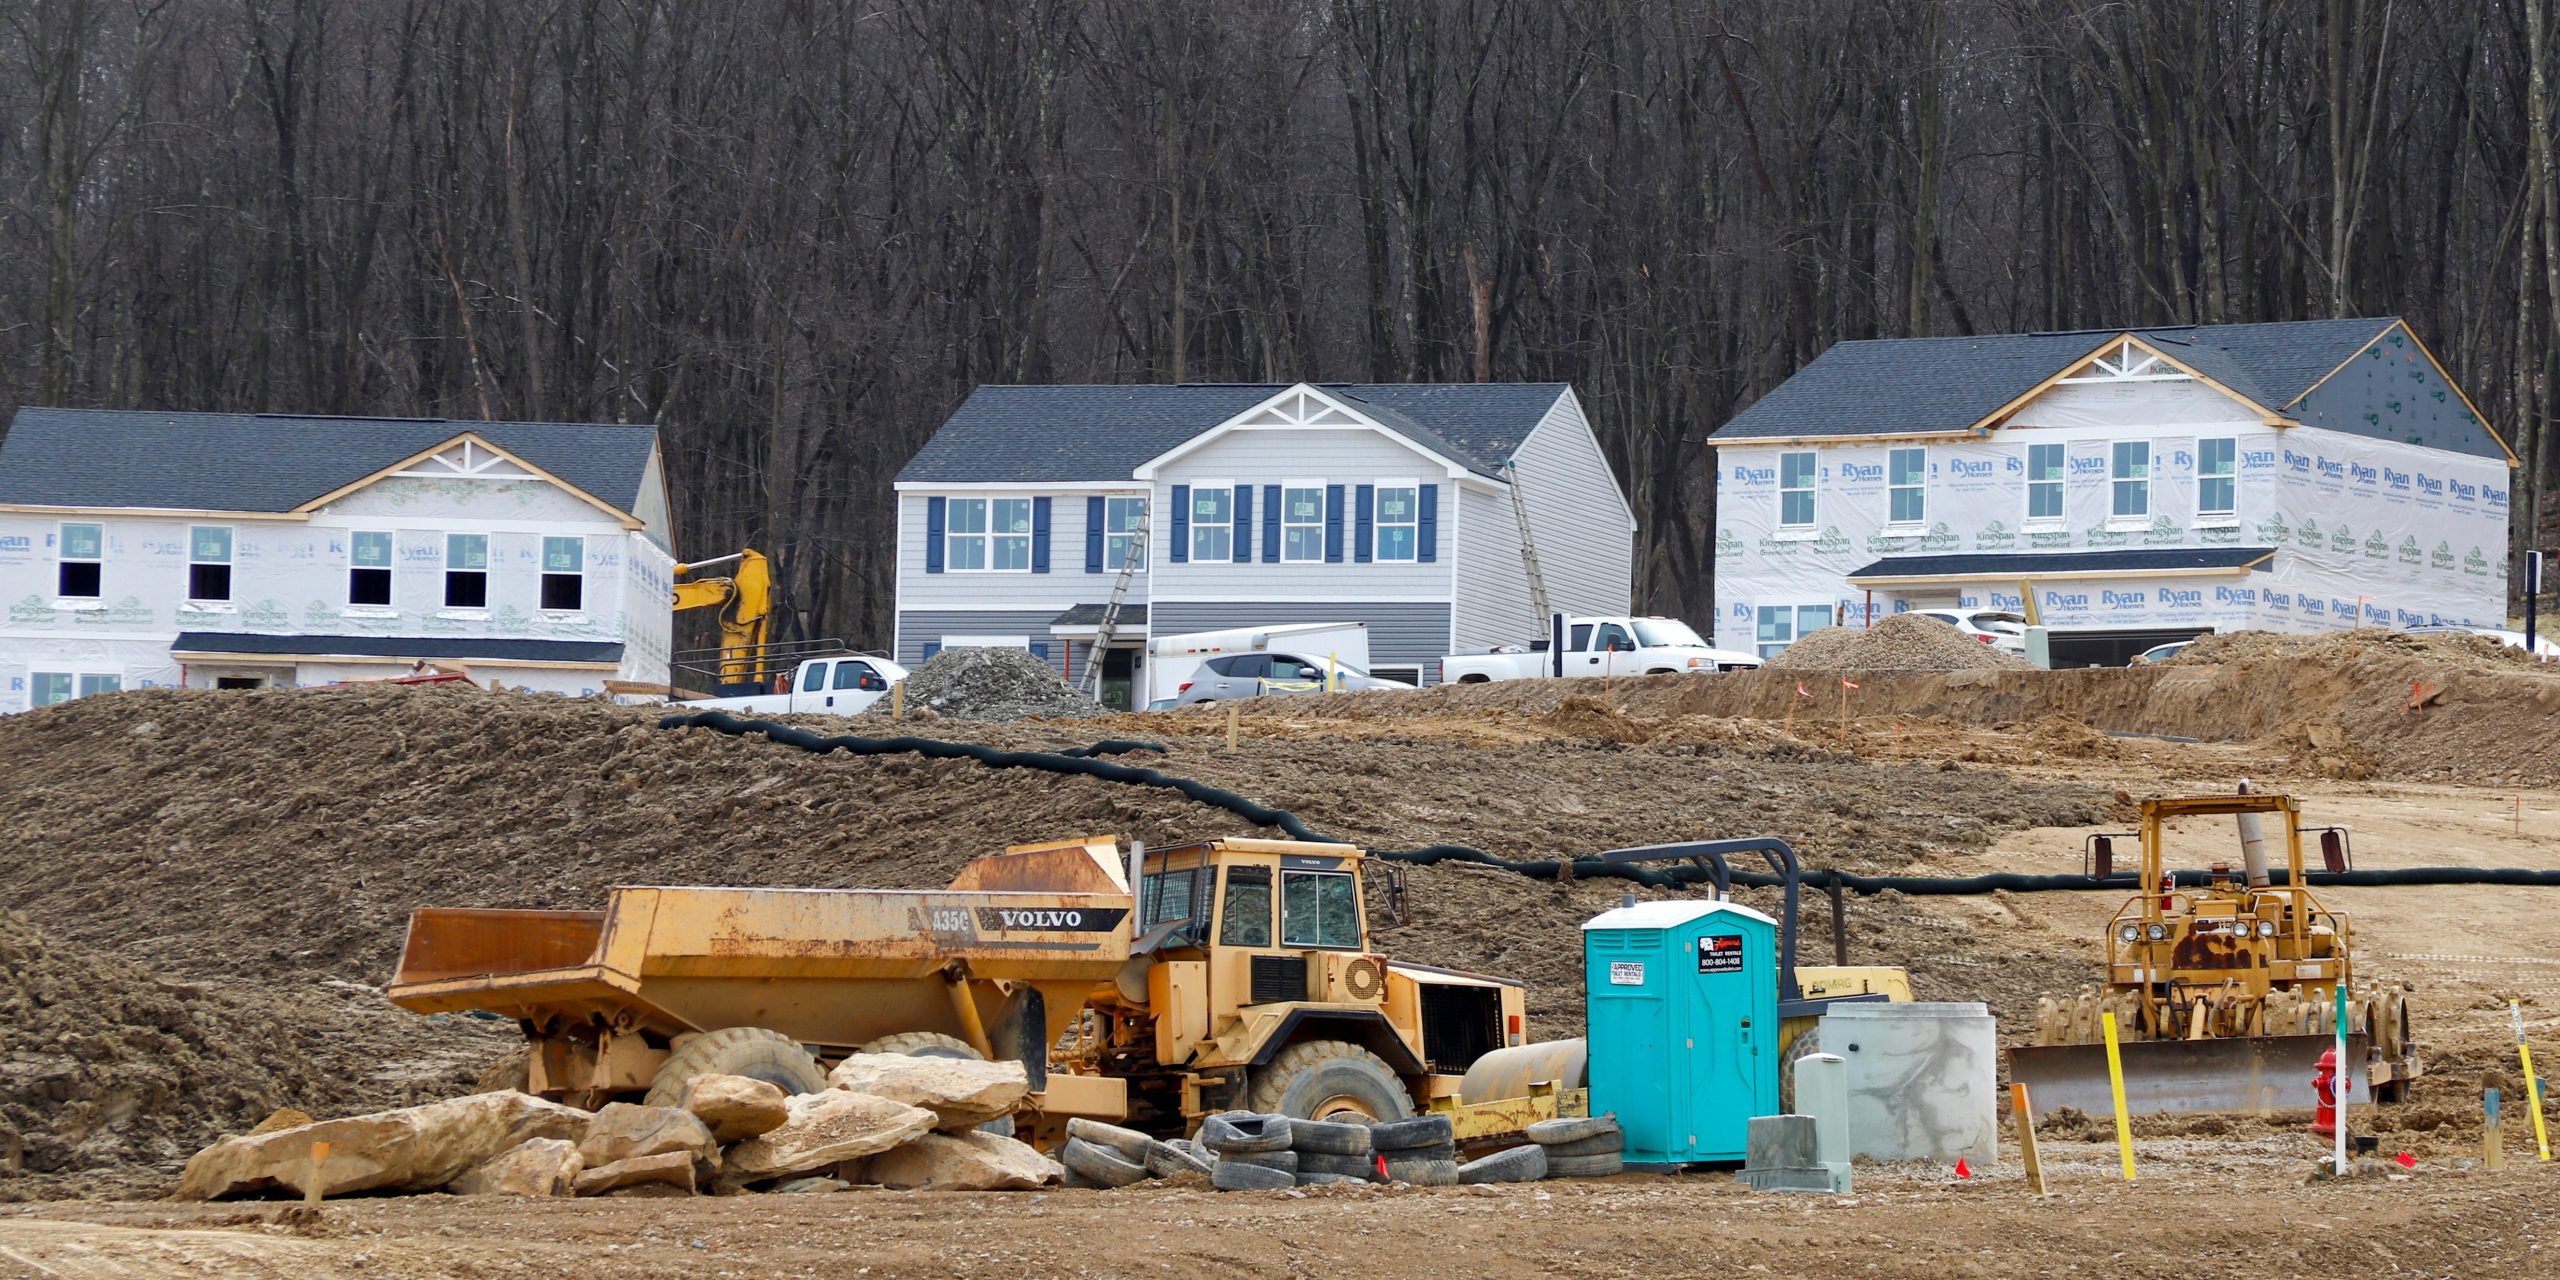 In this March 18, 2020 photo, Construction continues at a housing plan in Zelienople, Pa.,  The housing market has stalled, but homebuilder stocks are up sharply amid signs that sales are starting to improve. Still, the outlook for a housing market recovery remains cloudy, given uncertainty over the pandemic's impact. (AP Photo/Keith Srakocic)